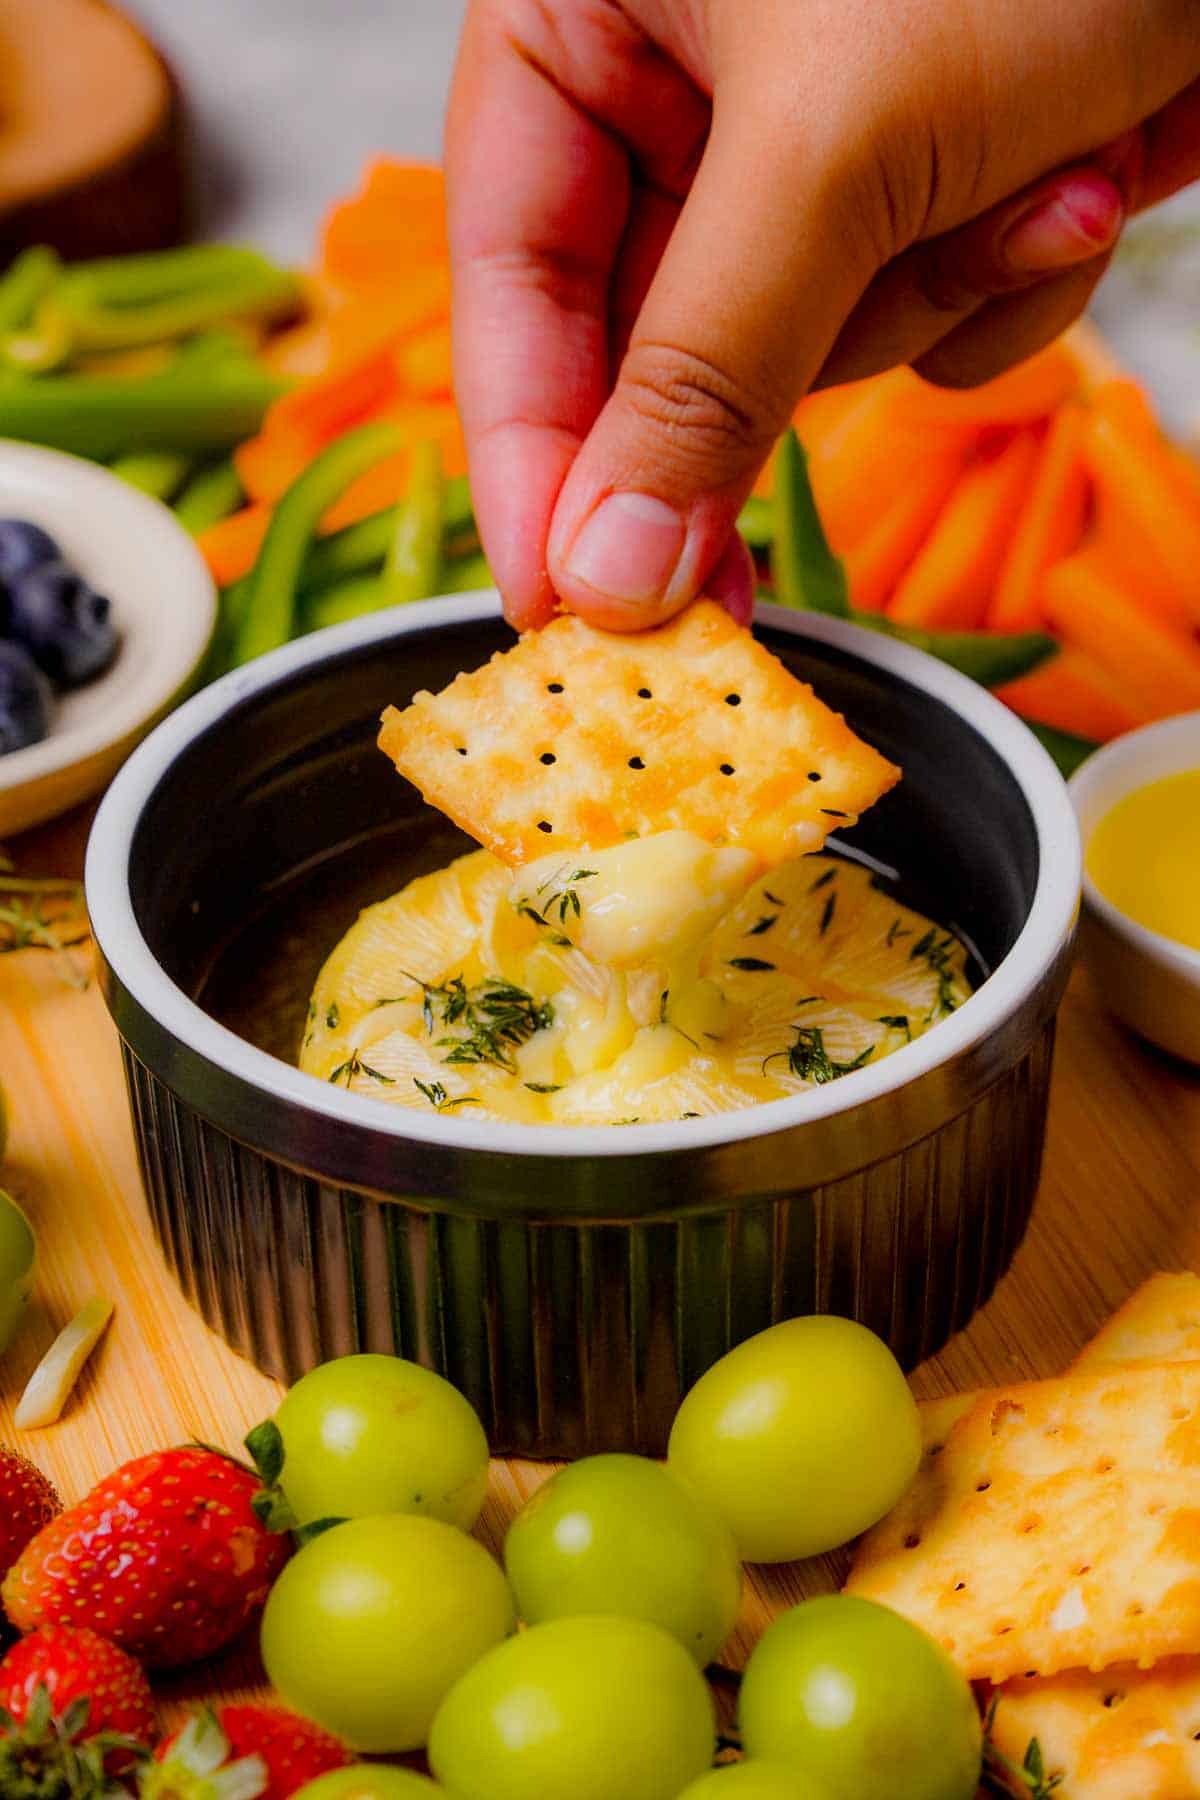 A cracker being dipped into baked brie with garlic and thyme.